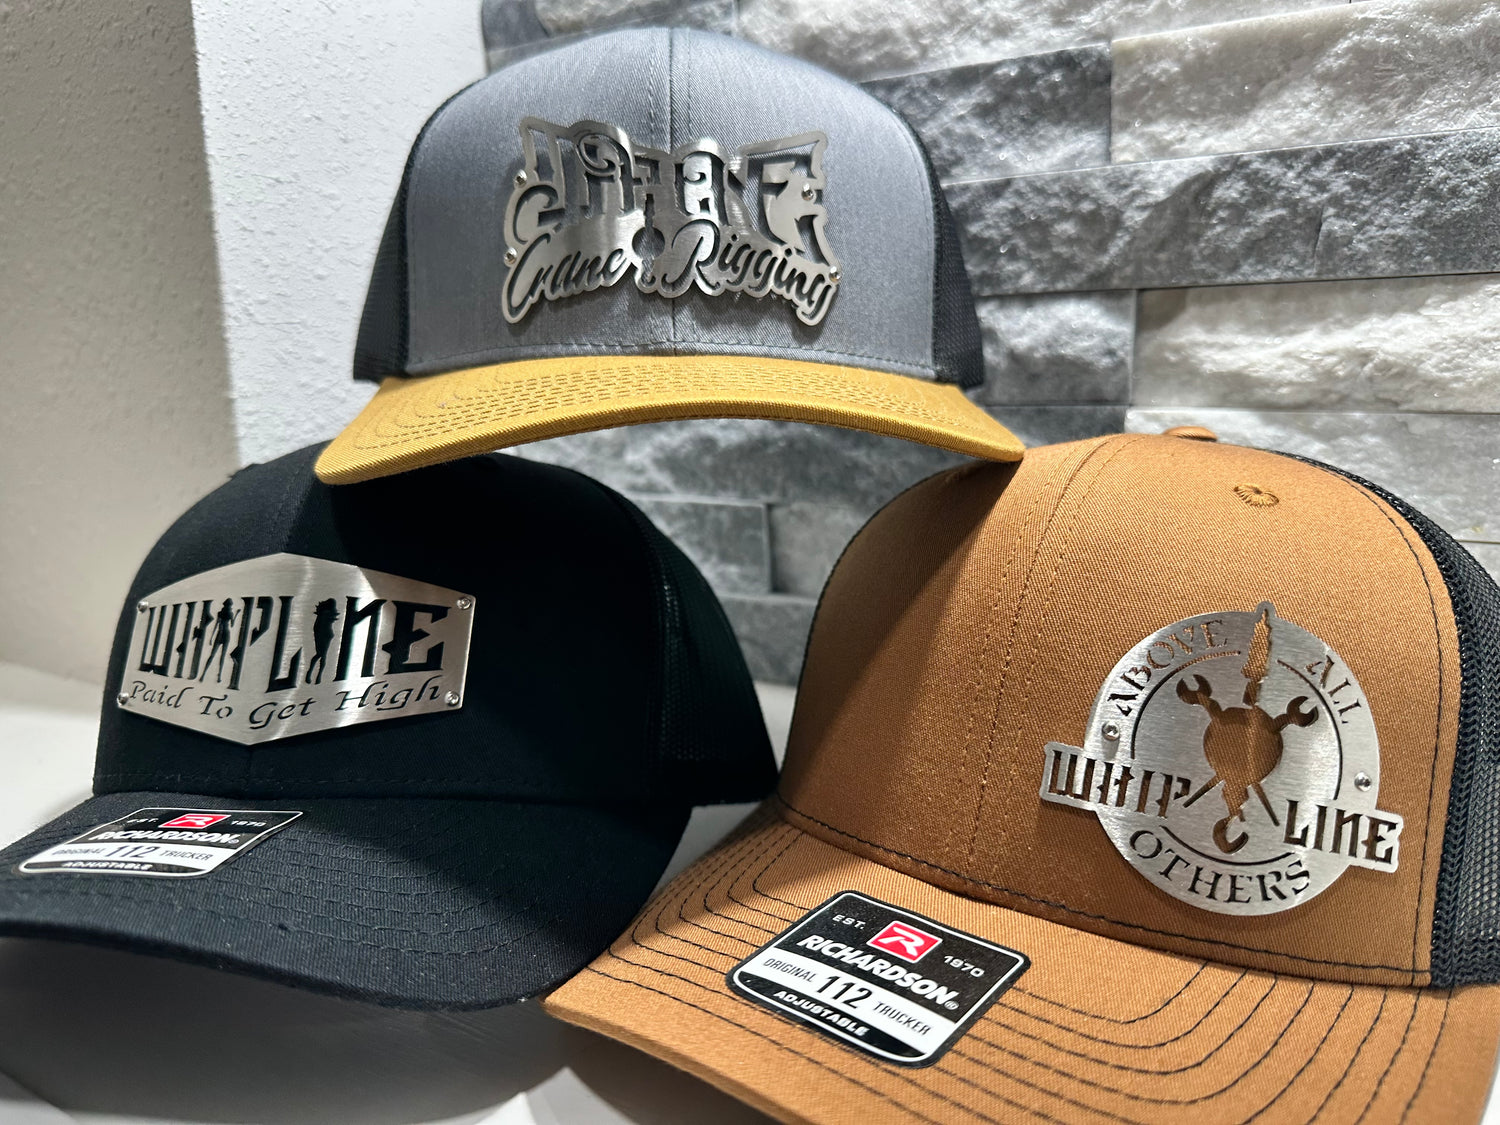 Stainless steel badge hats